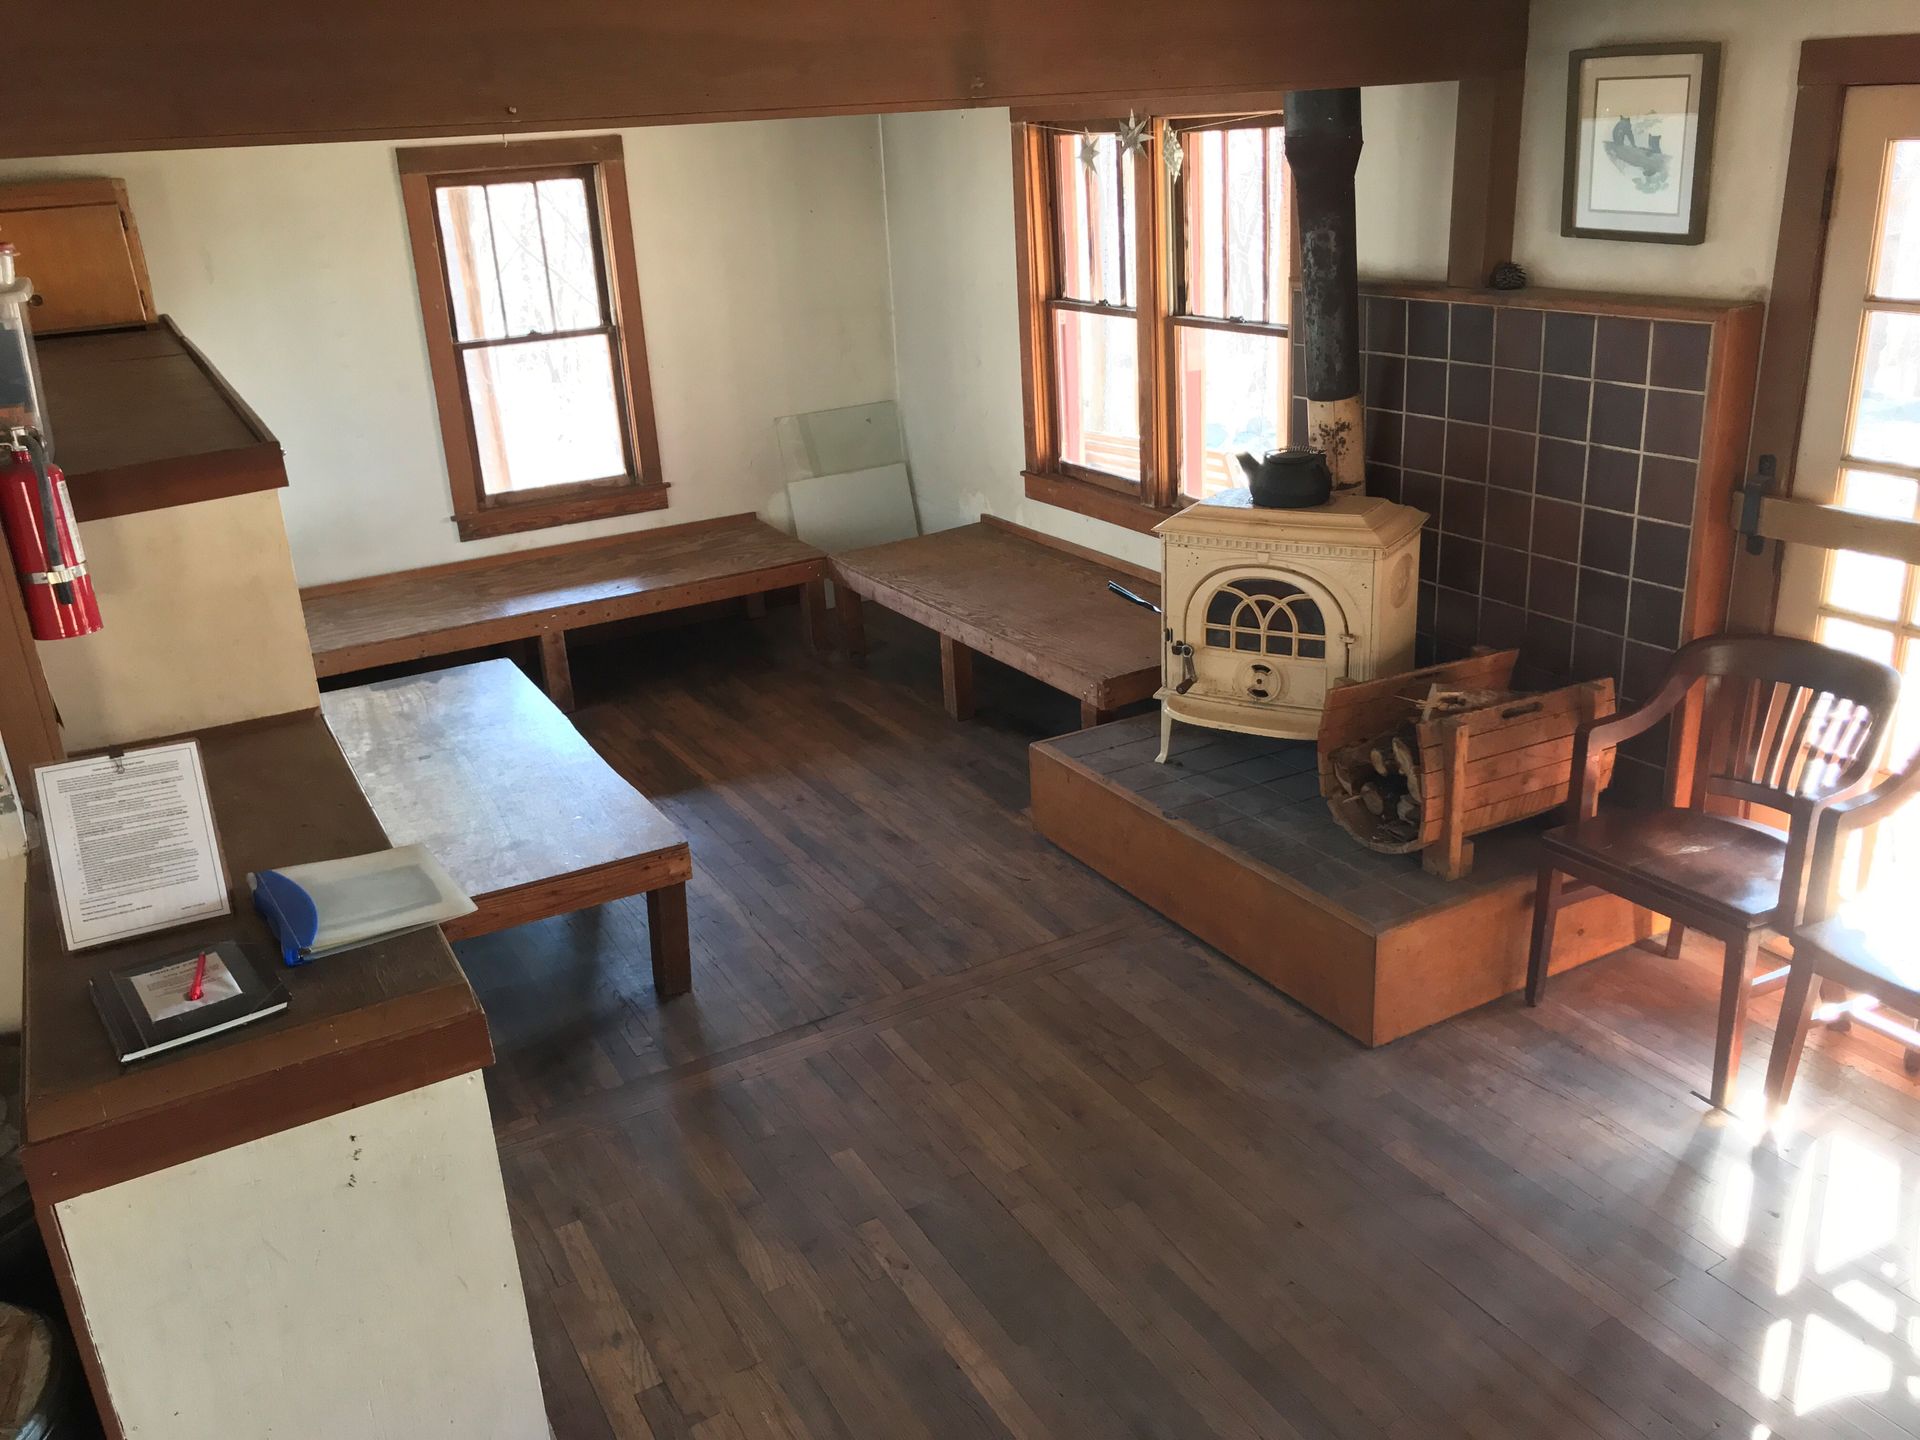 The interior of Conley cabin features multiple platforms to sleep on, a small fire place, and wooden chairs.